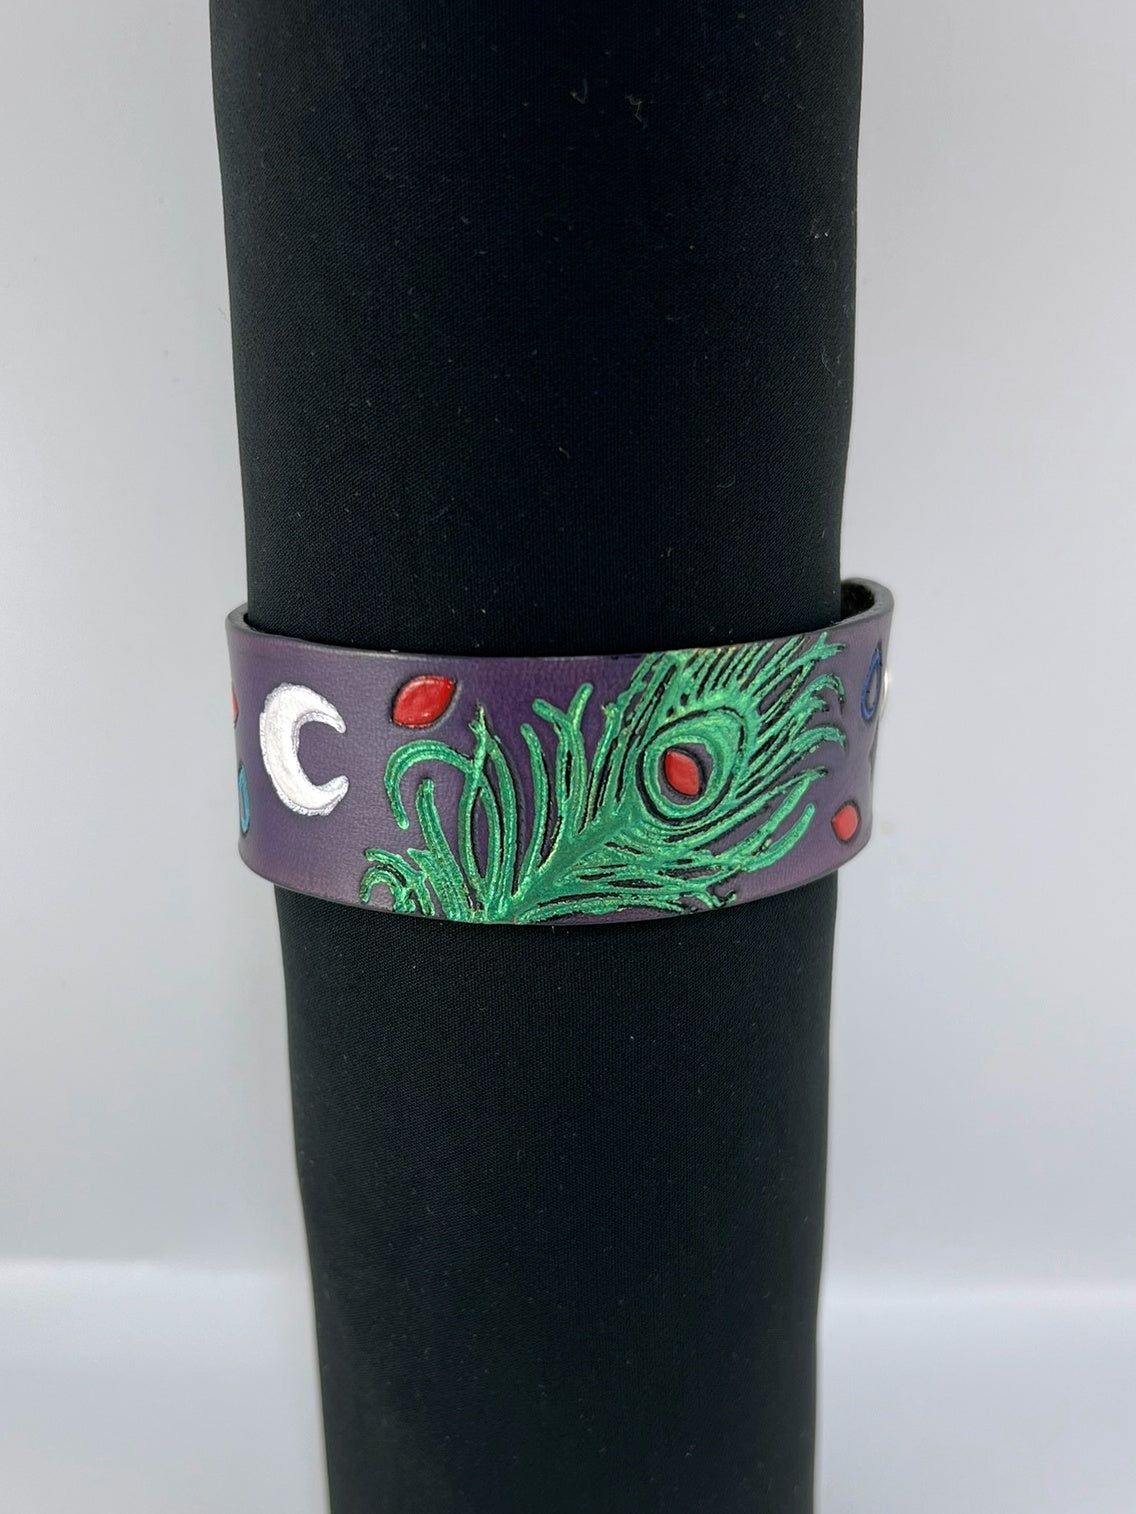 "Long May He Reign" Leather Cuff